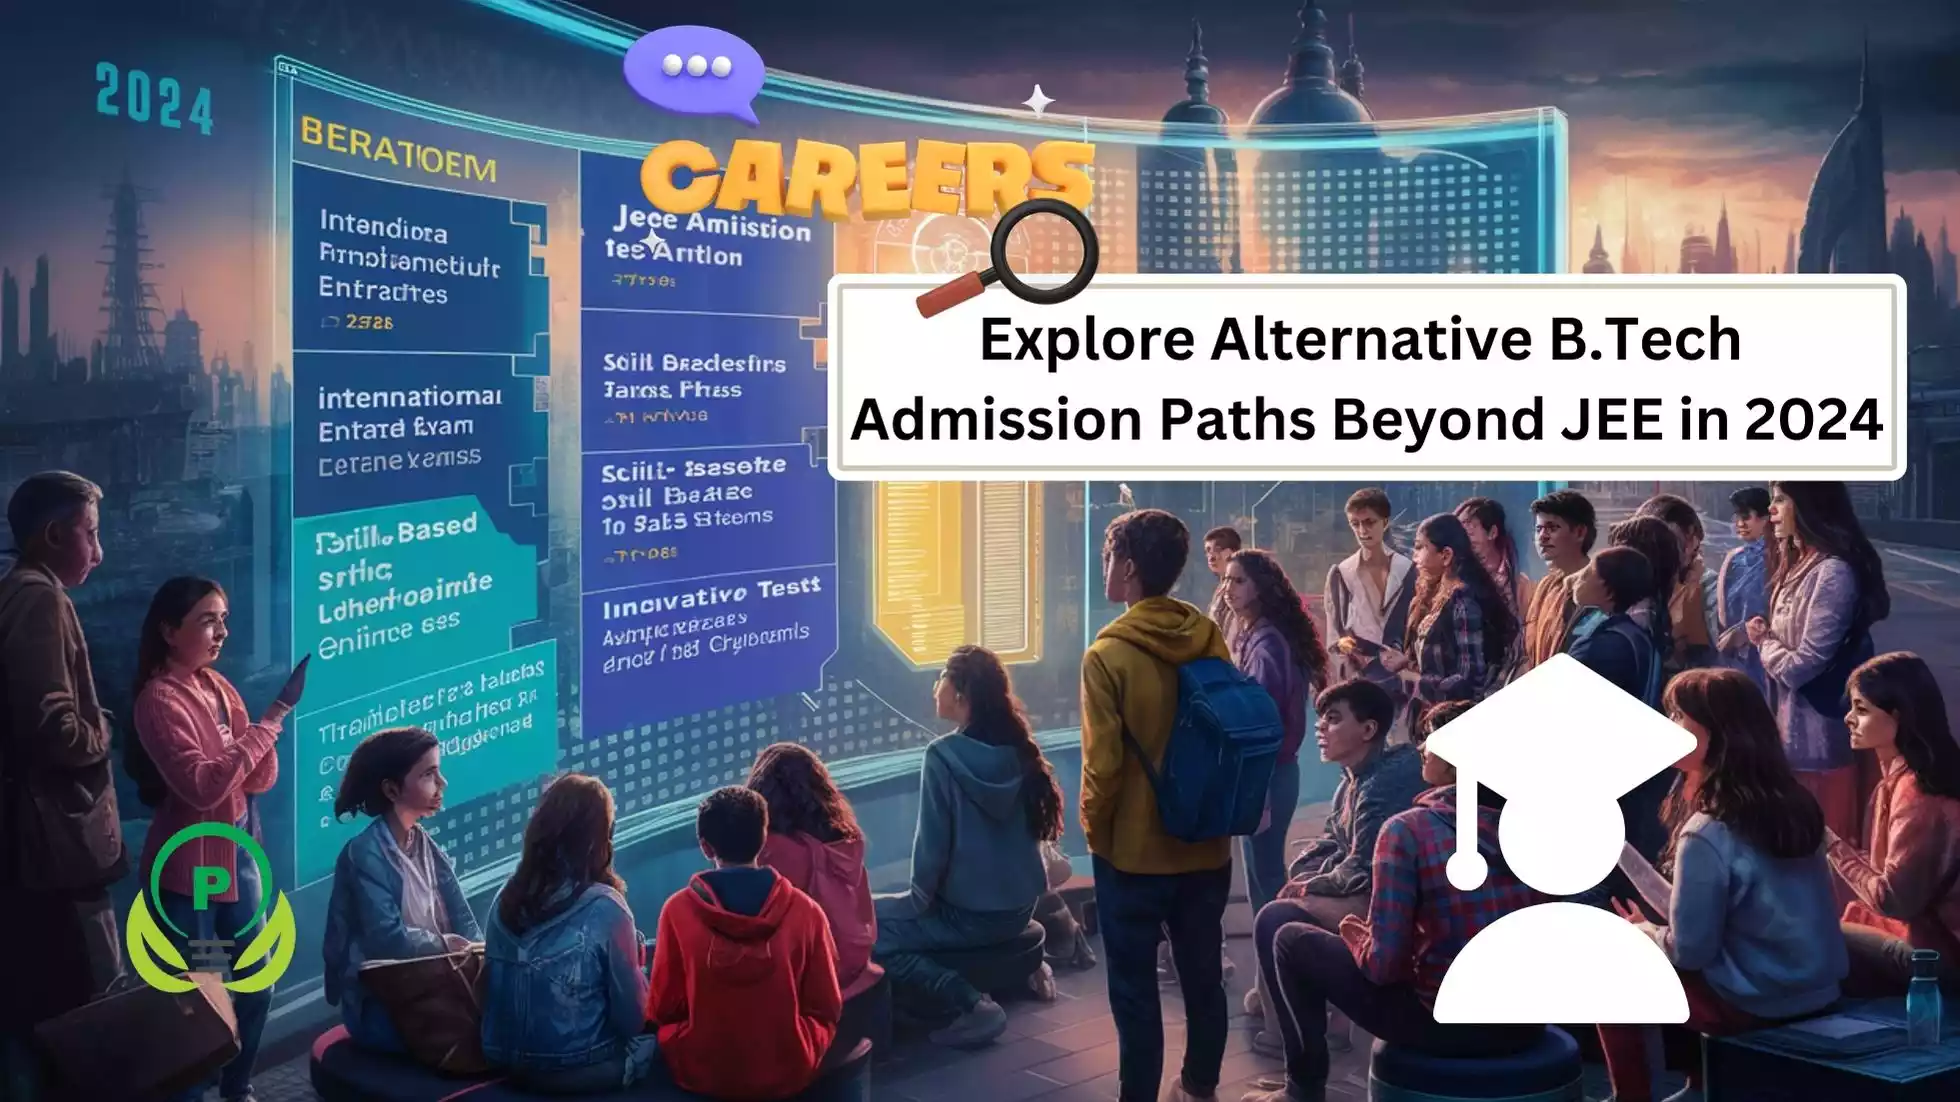 Exploring Alternative B.Tech Admission Paths Beyond JEE in 2024